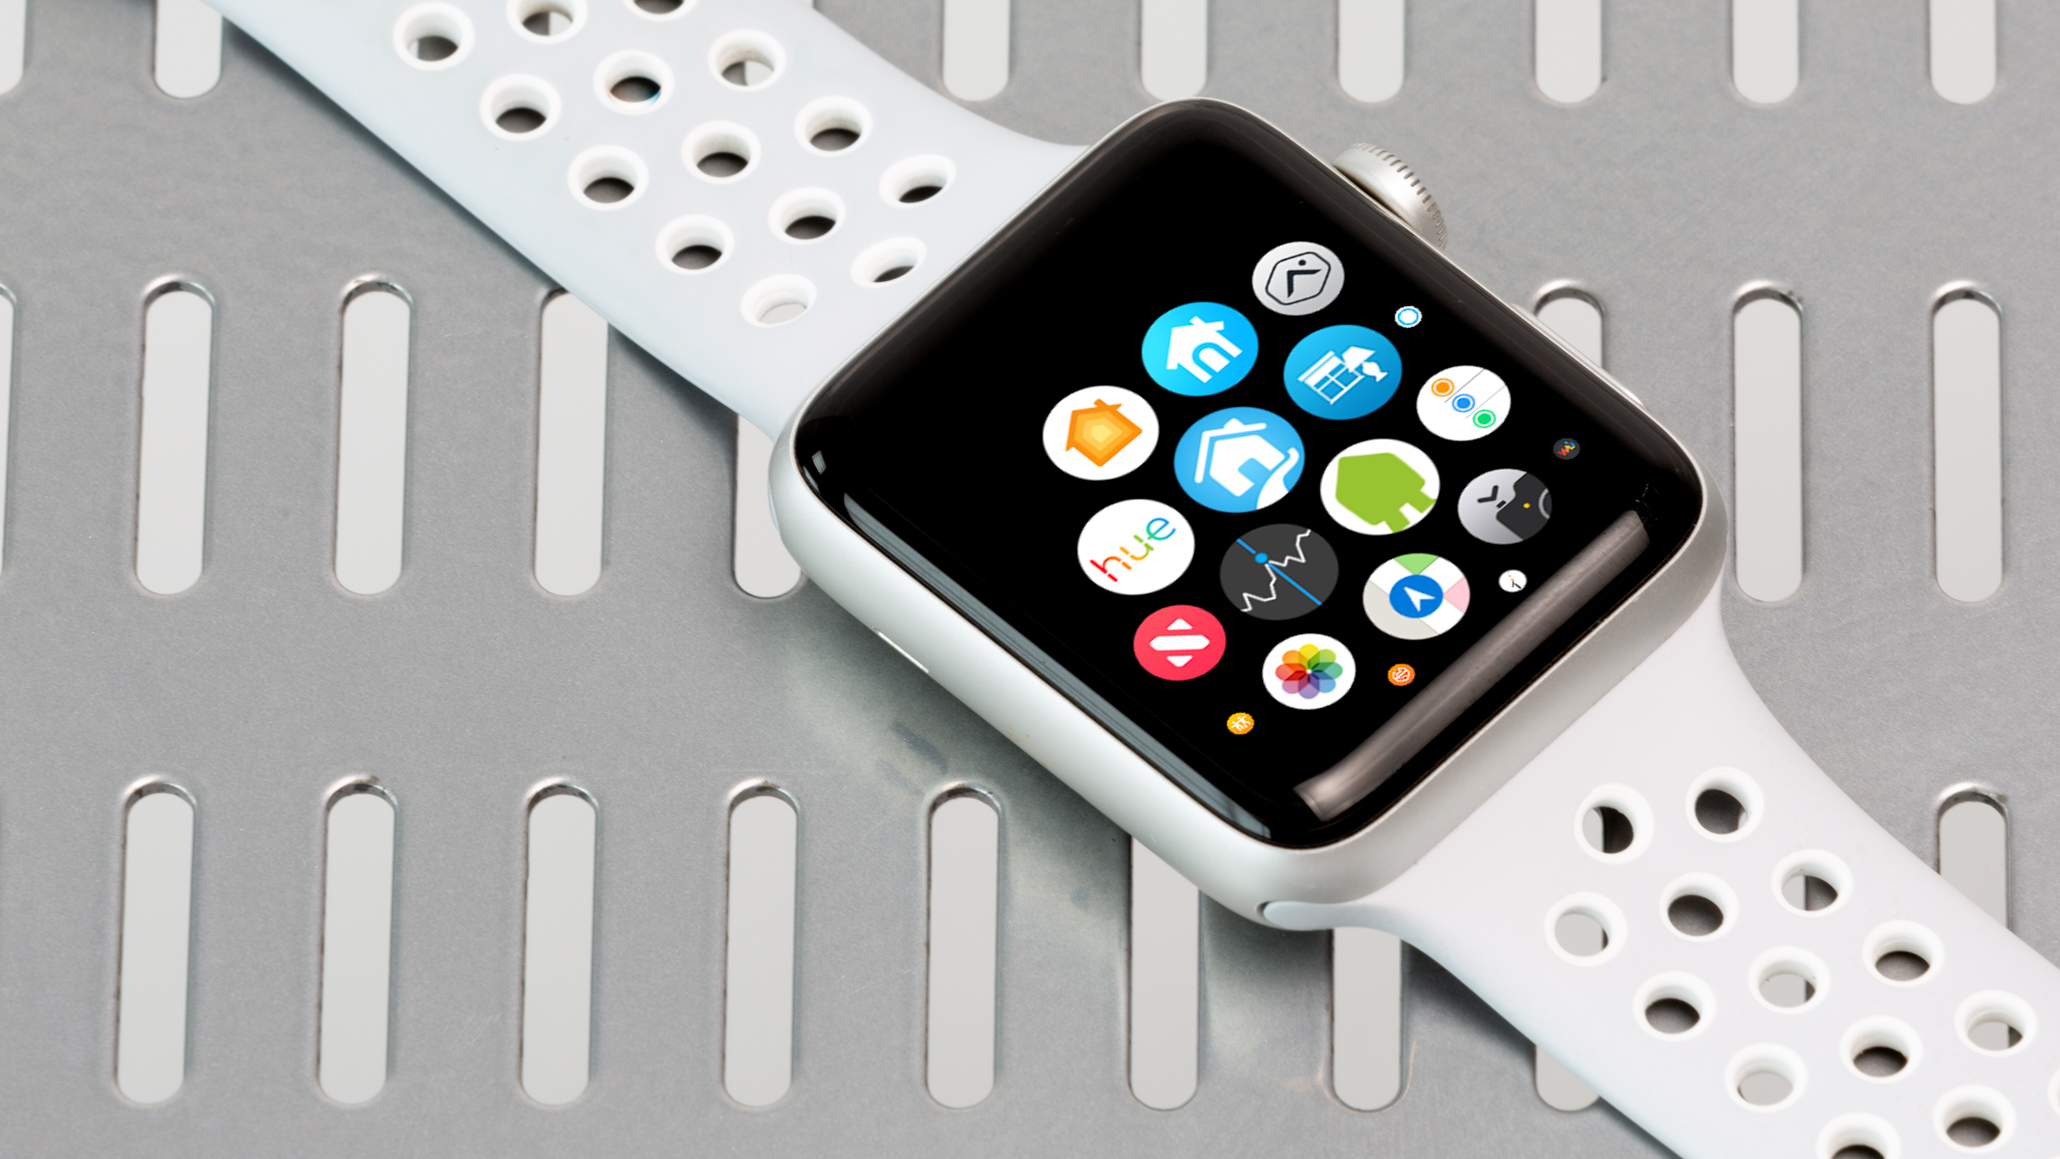 On this Apple Watch, we installed a trove of connected home apps, including Apple Home, Nest, Alarm.com, Philips Hue, Insteon for Hub, Lutron, Smappee, and Samsung SmartThings. Image: Digitized House Media.